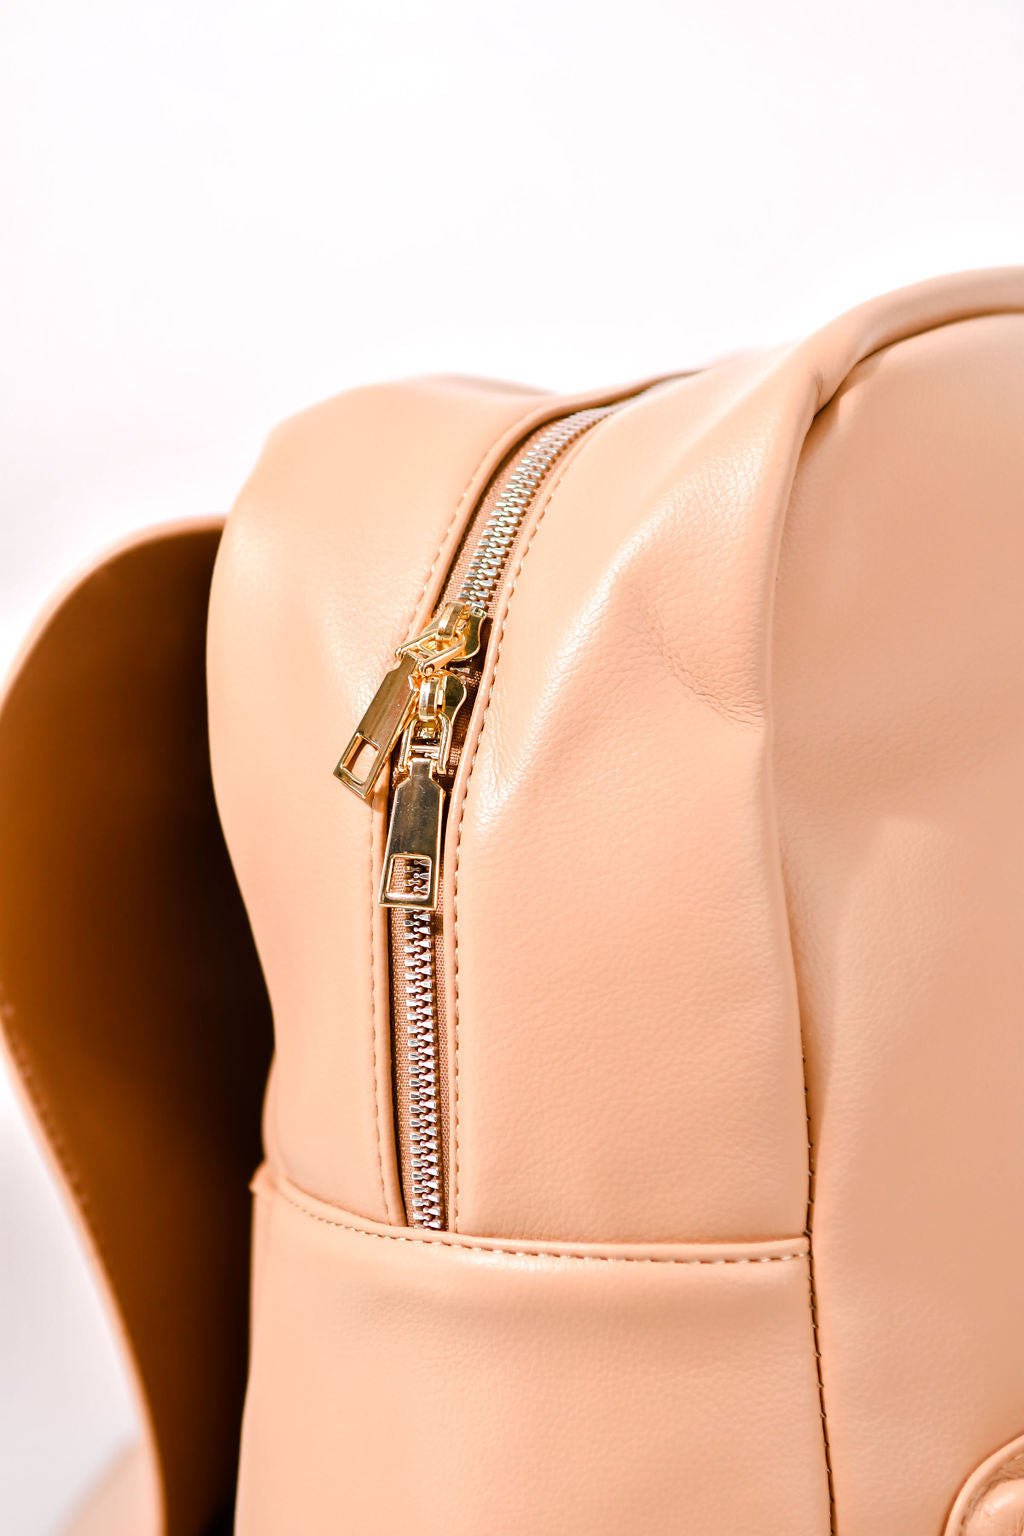 tan backpack zip view on a white background